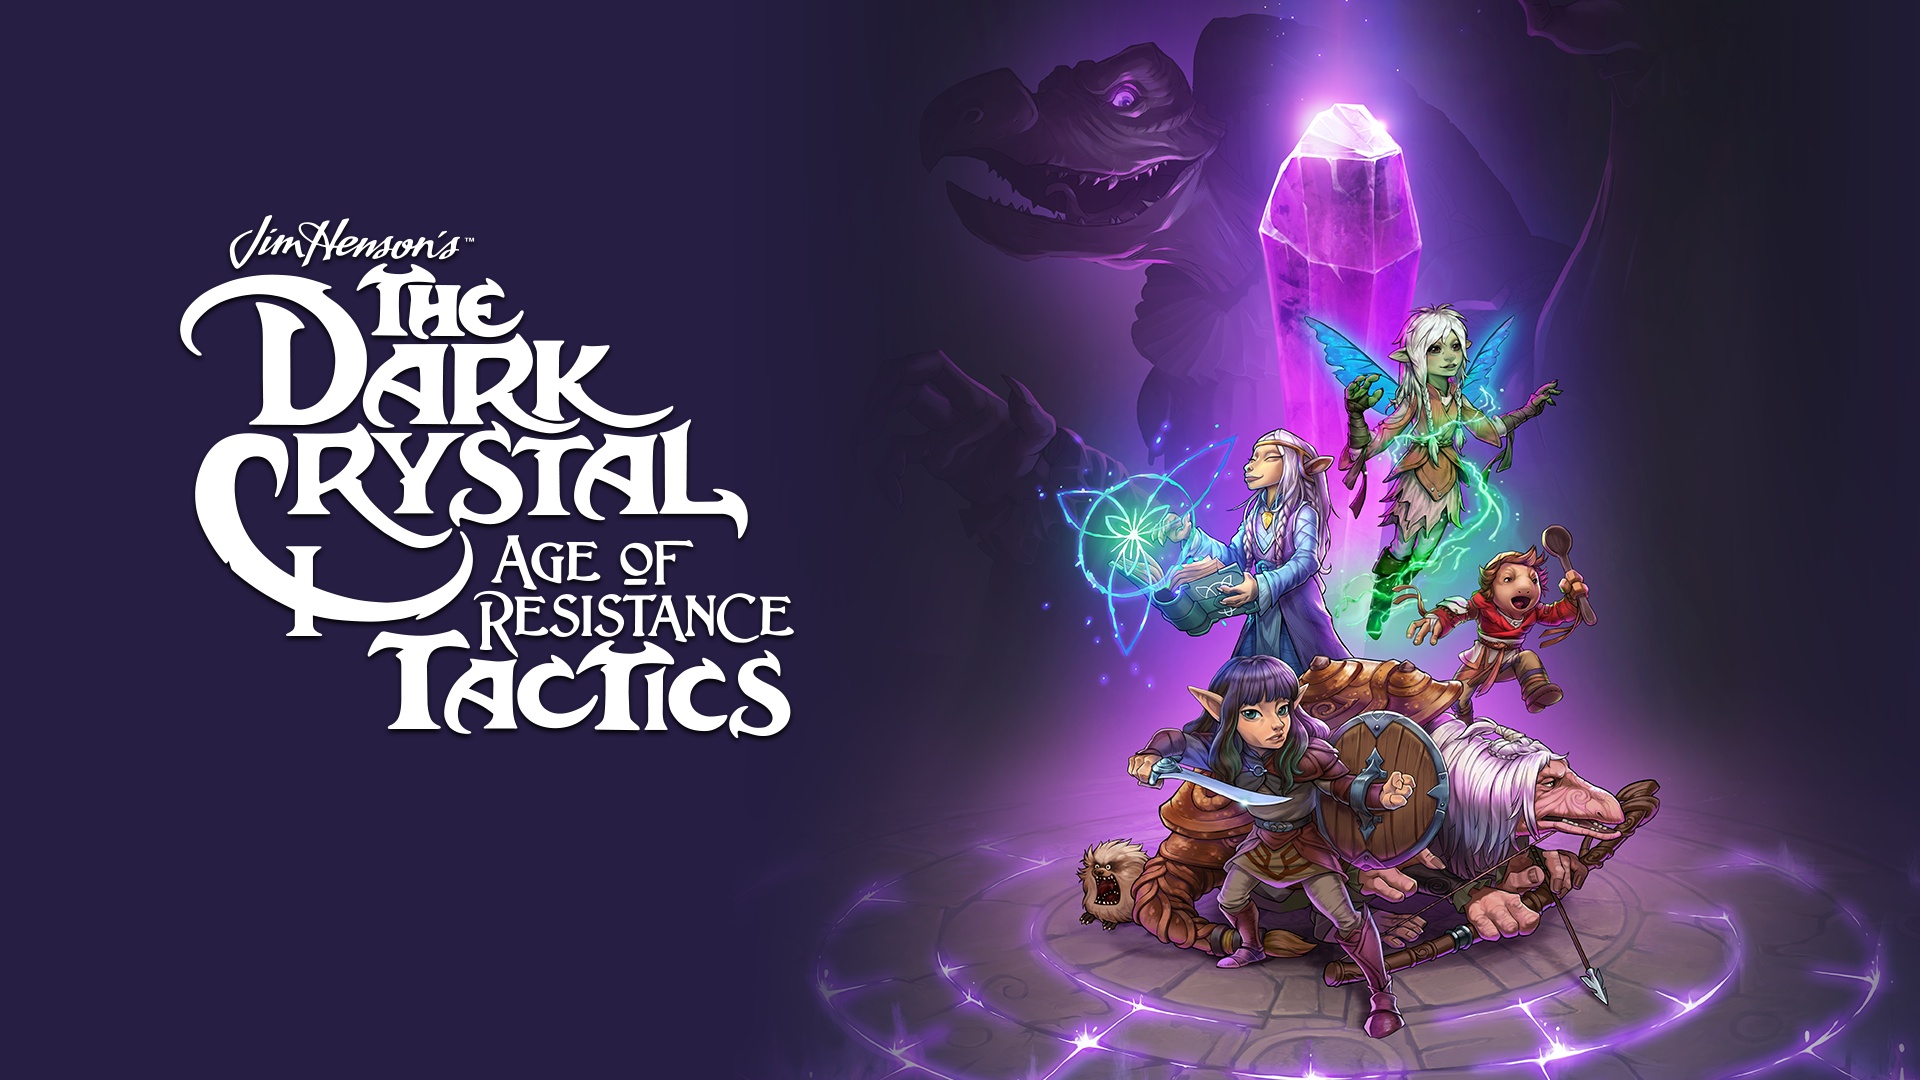 Video For Exploring the World of Thra in The Dark Crystal: Age of Resistance Tactics, Available Now on Xbox